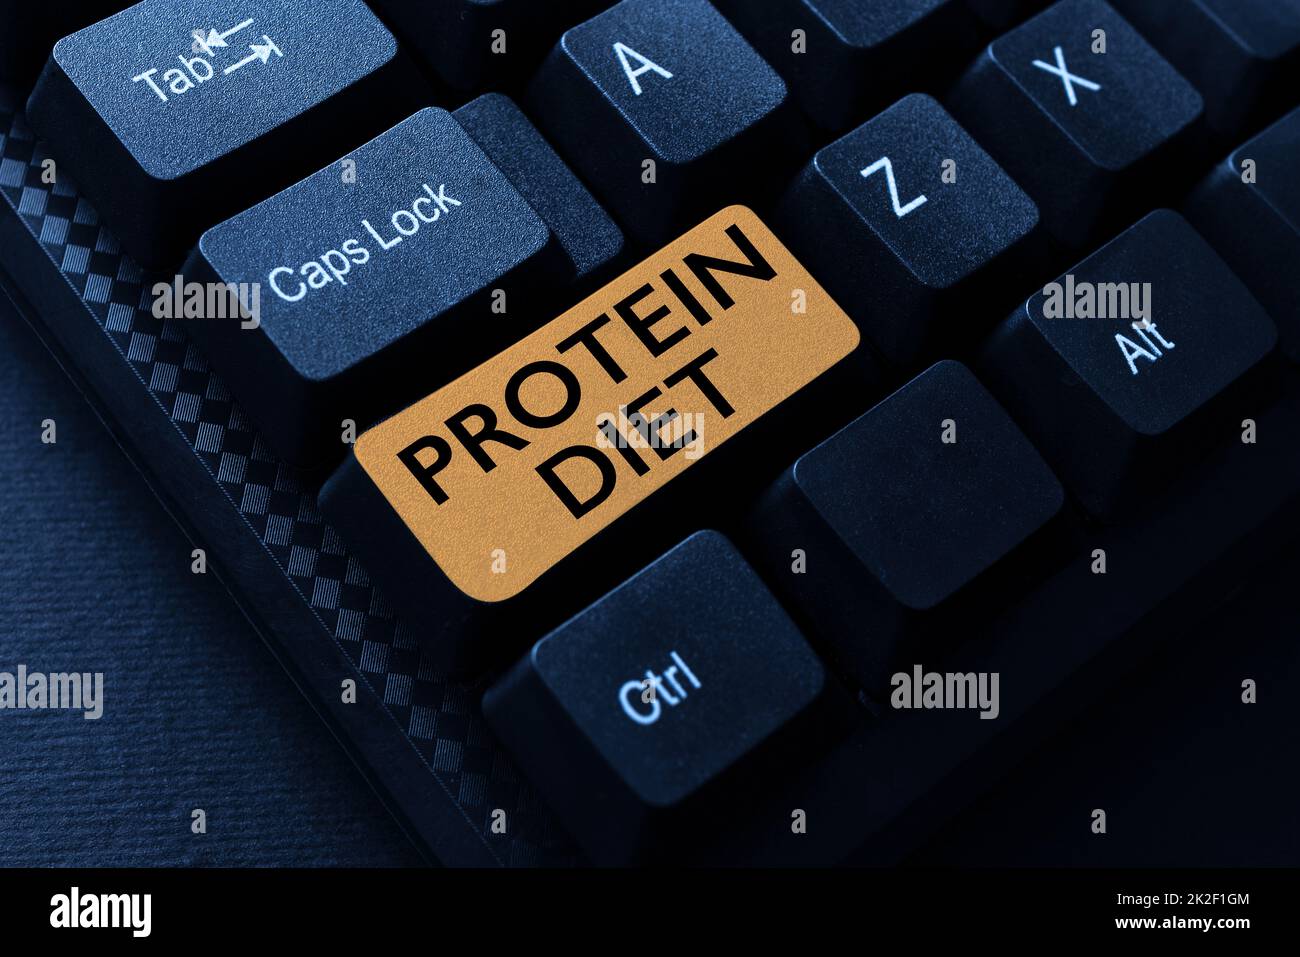 Sign displaying Protein Diet. Business approach low in fat or carbohydrate consumption weight loss plan Creating New Online Cookbook, Typing And Sharing Cooking Recipes Stock Photo